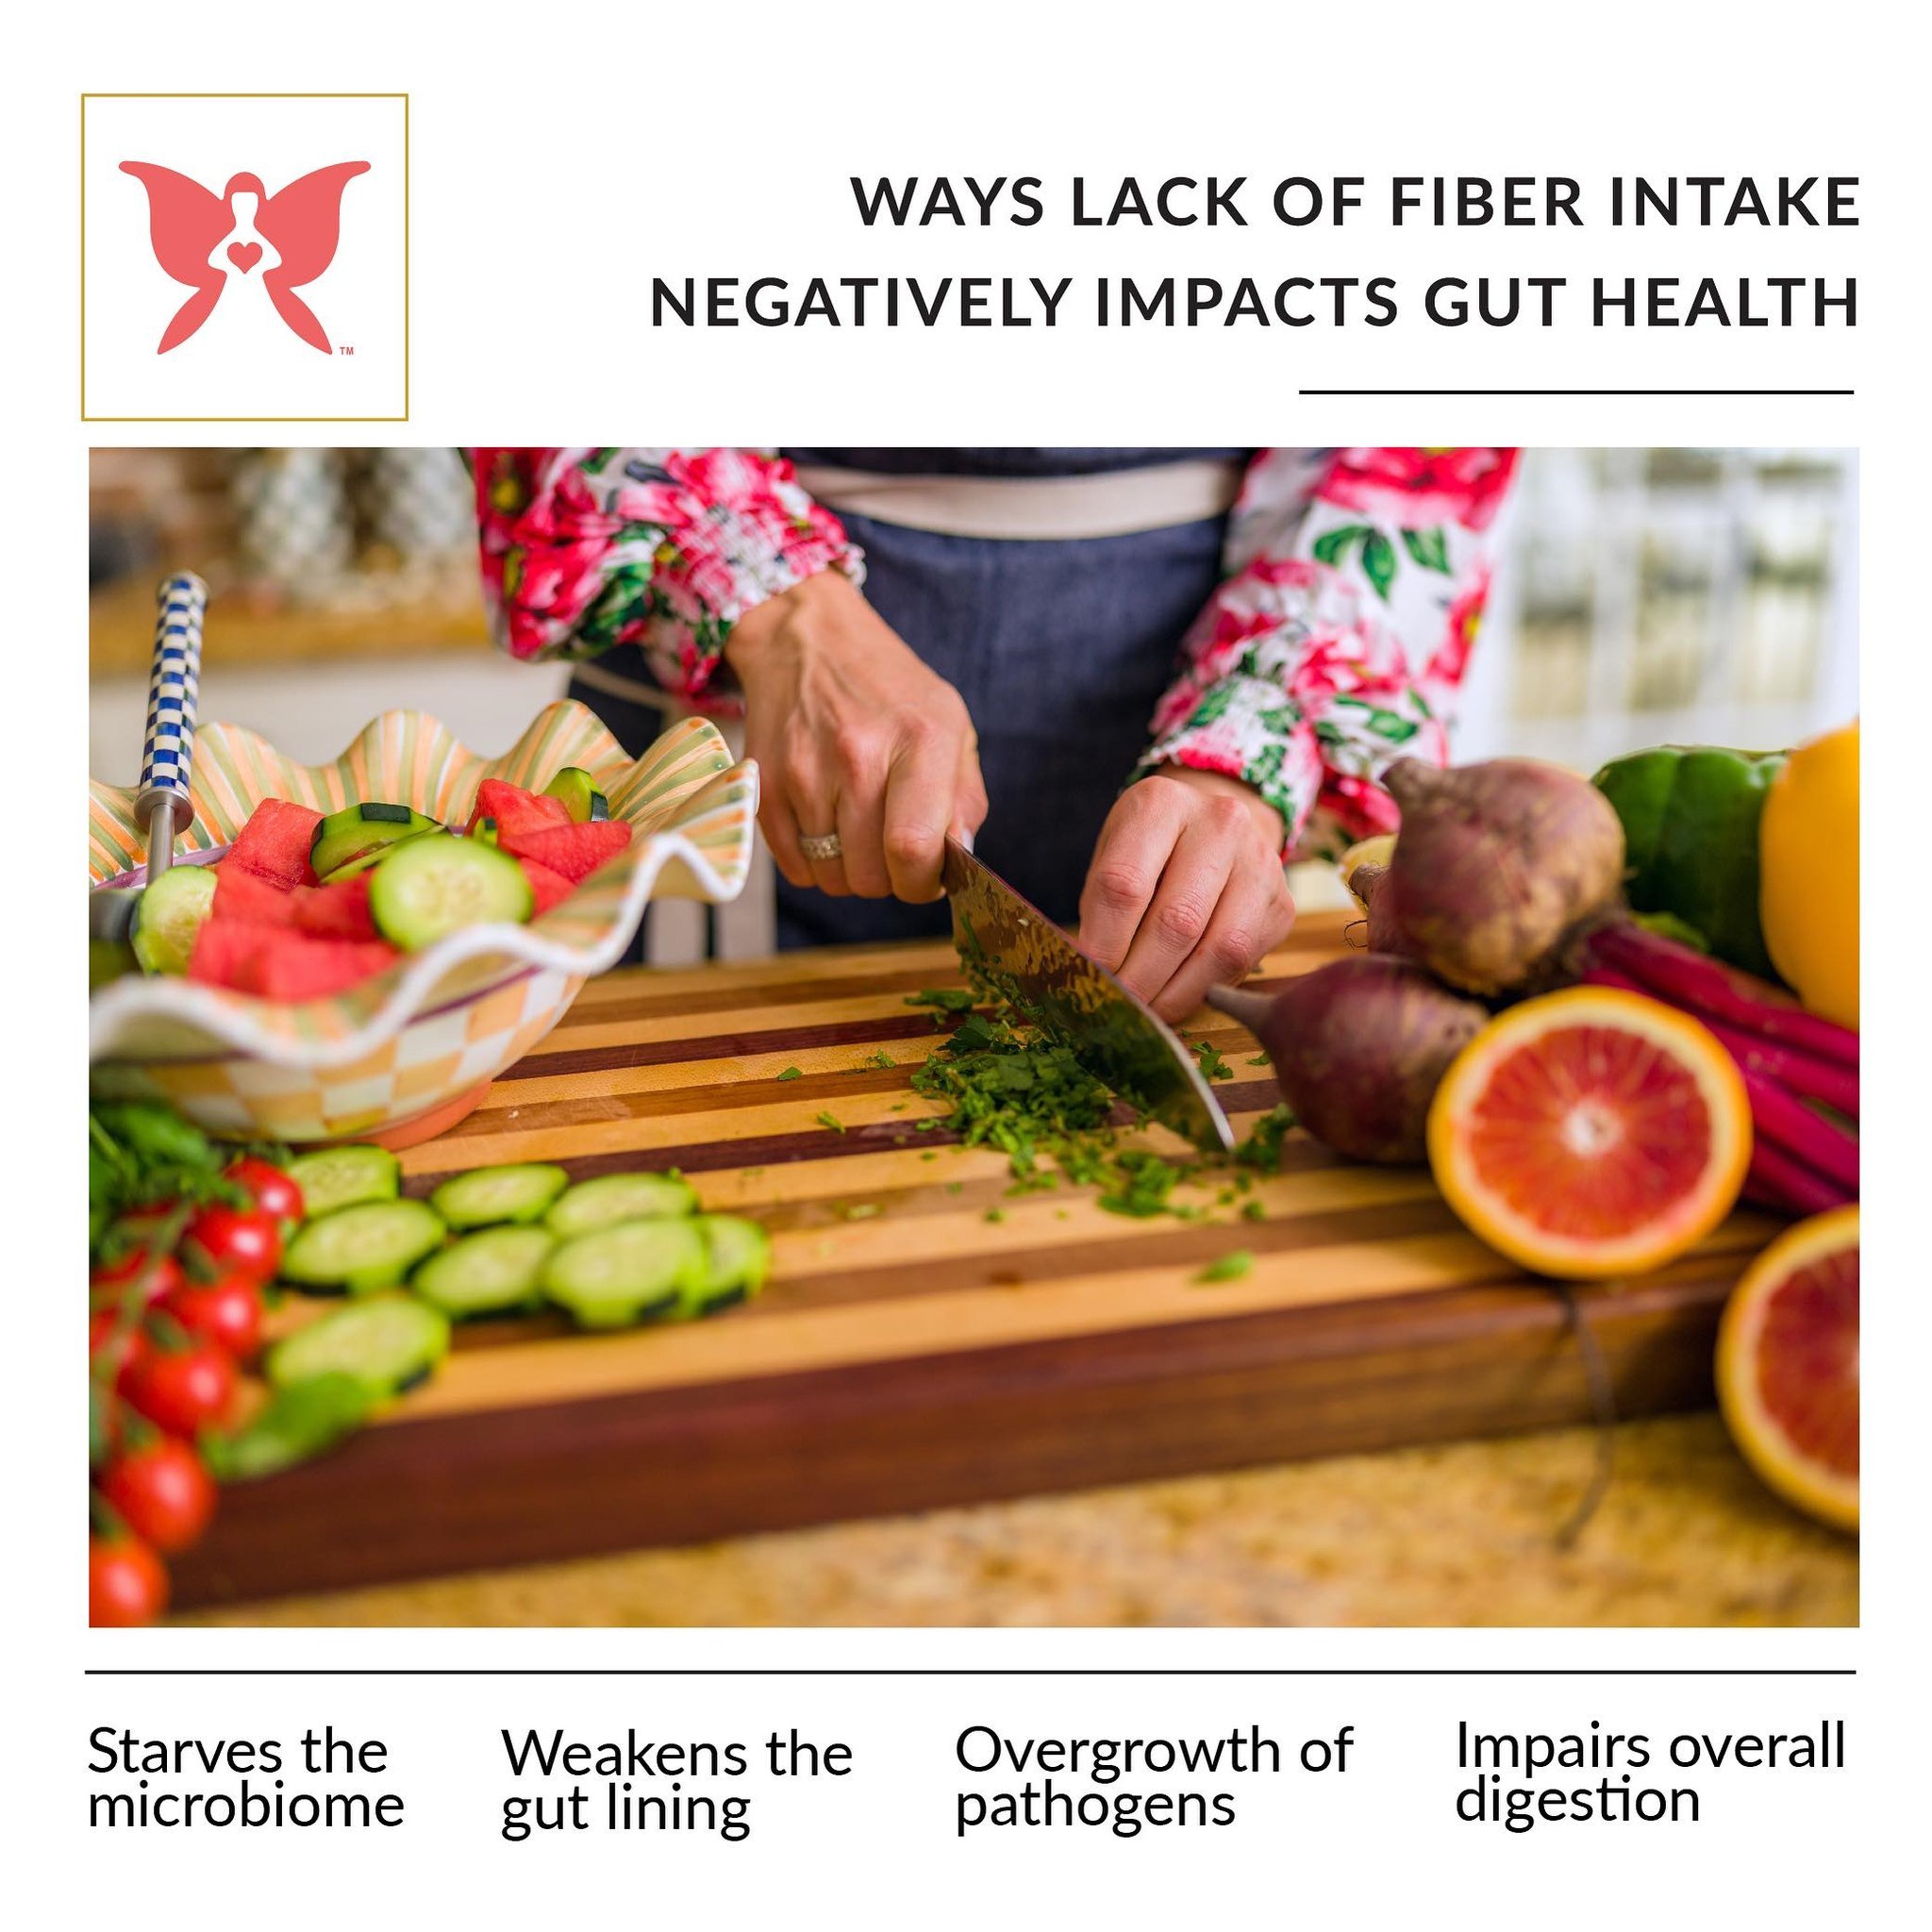 Many people are unaware that the lack of fiber in their diet can be as harmful to their gut as consuming foods high in sugar and processed foods. It is recommended to consume 25 to 30 grams of fiber daily. Unfortunately, the average American adult on